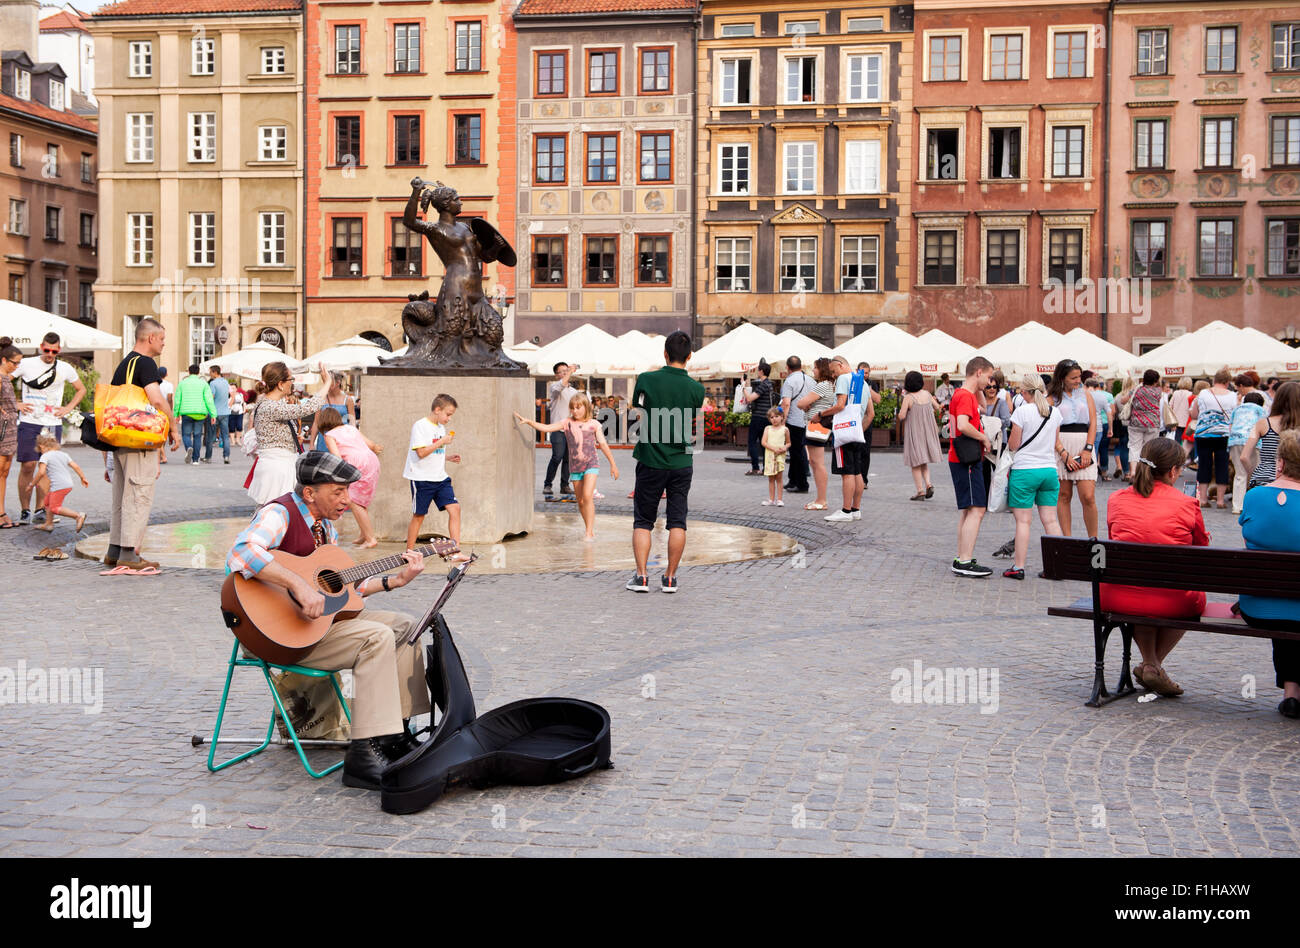 Old man busker gig playing guitar in Old Town Market Place square in Warsaw, Poland. Street art singer performer alone show. Stock Photo